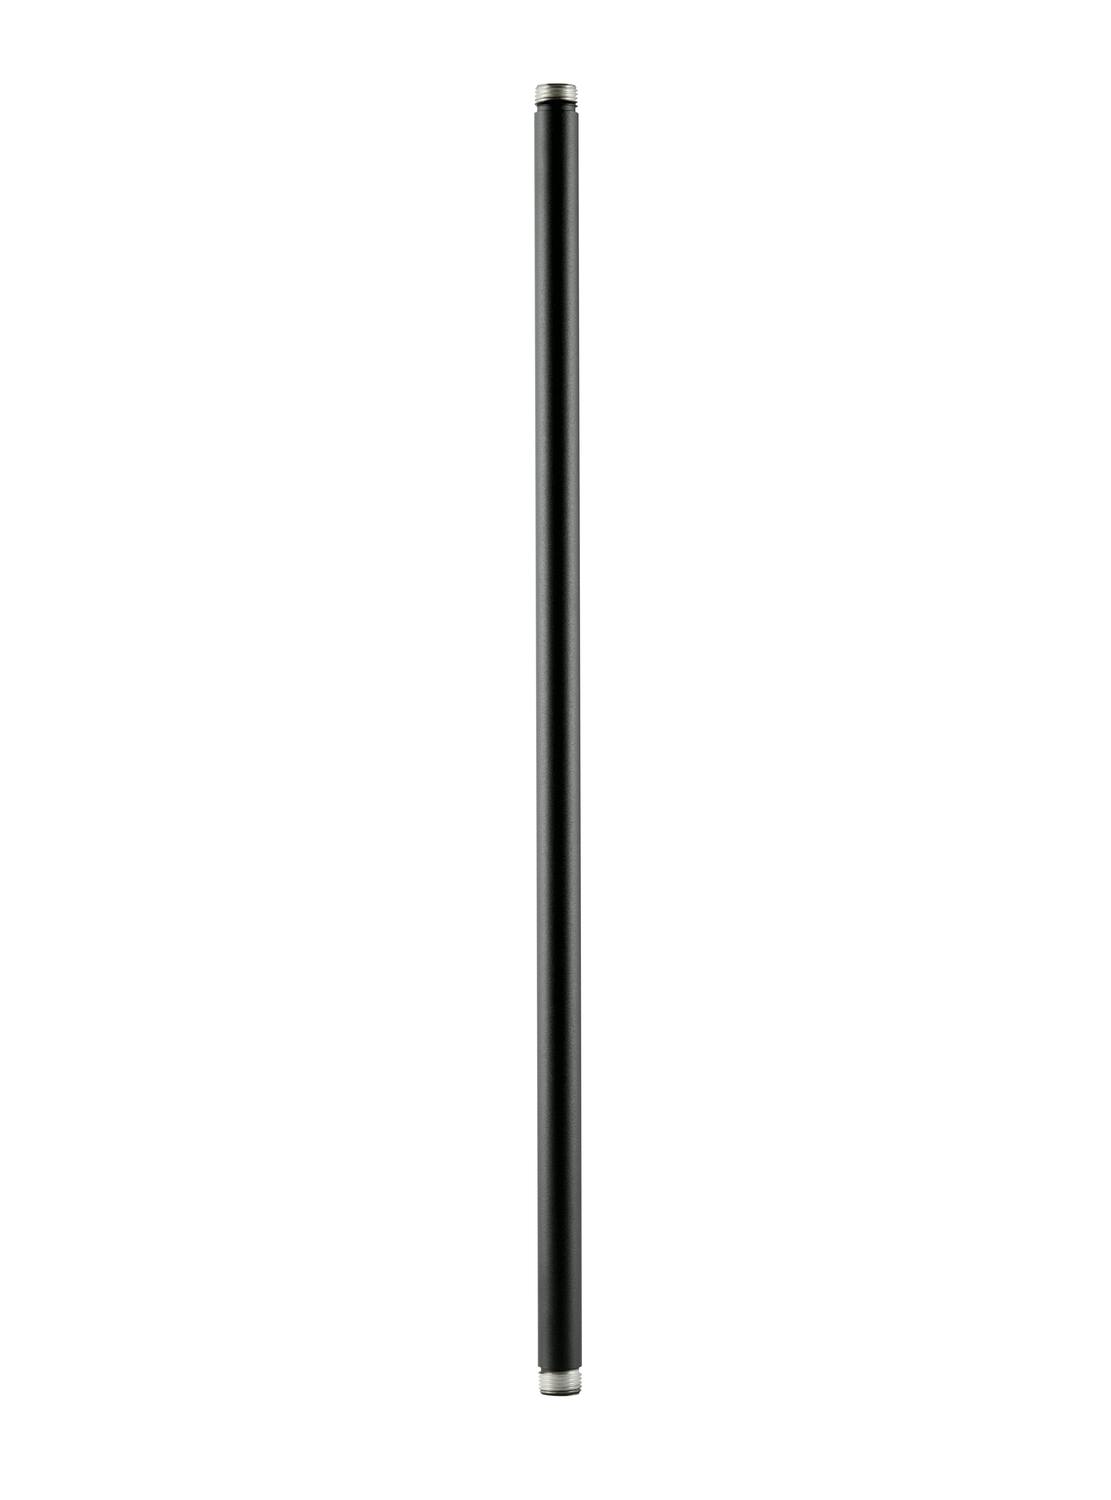 24" Fixture Mounting Stems .5 NPSM Textured Black on a white background